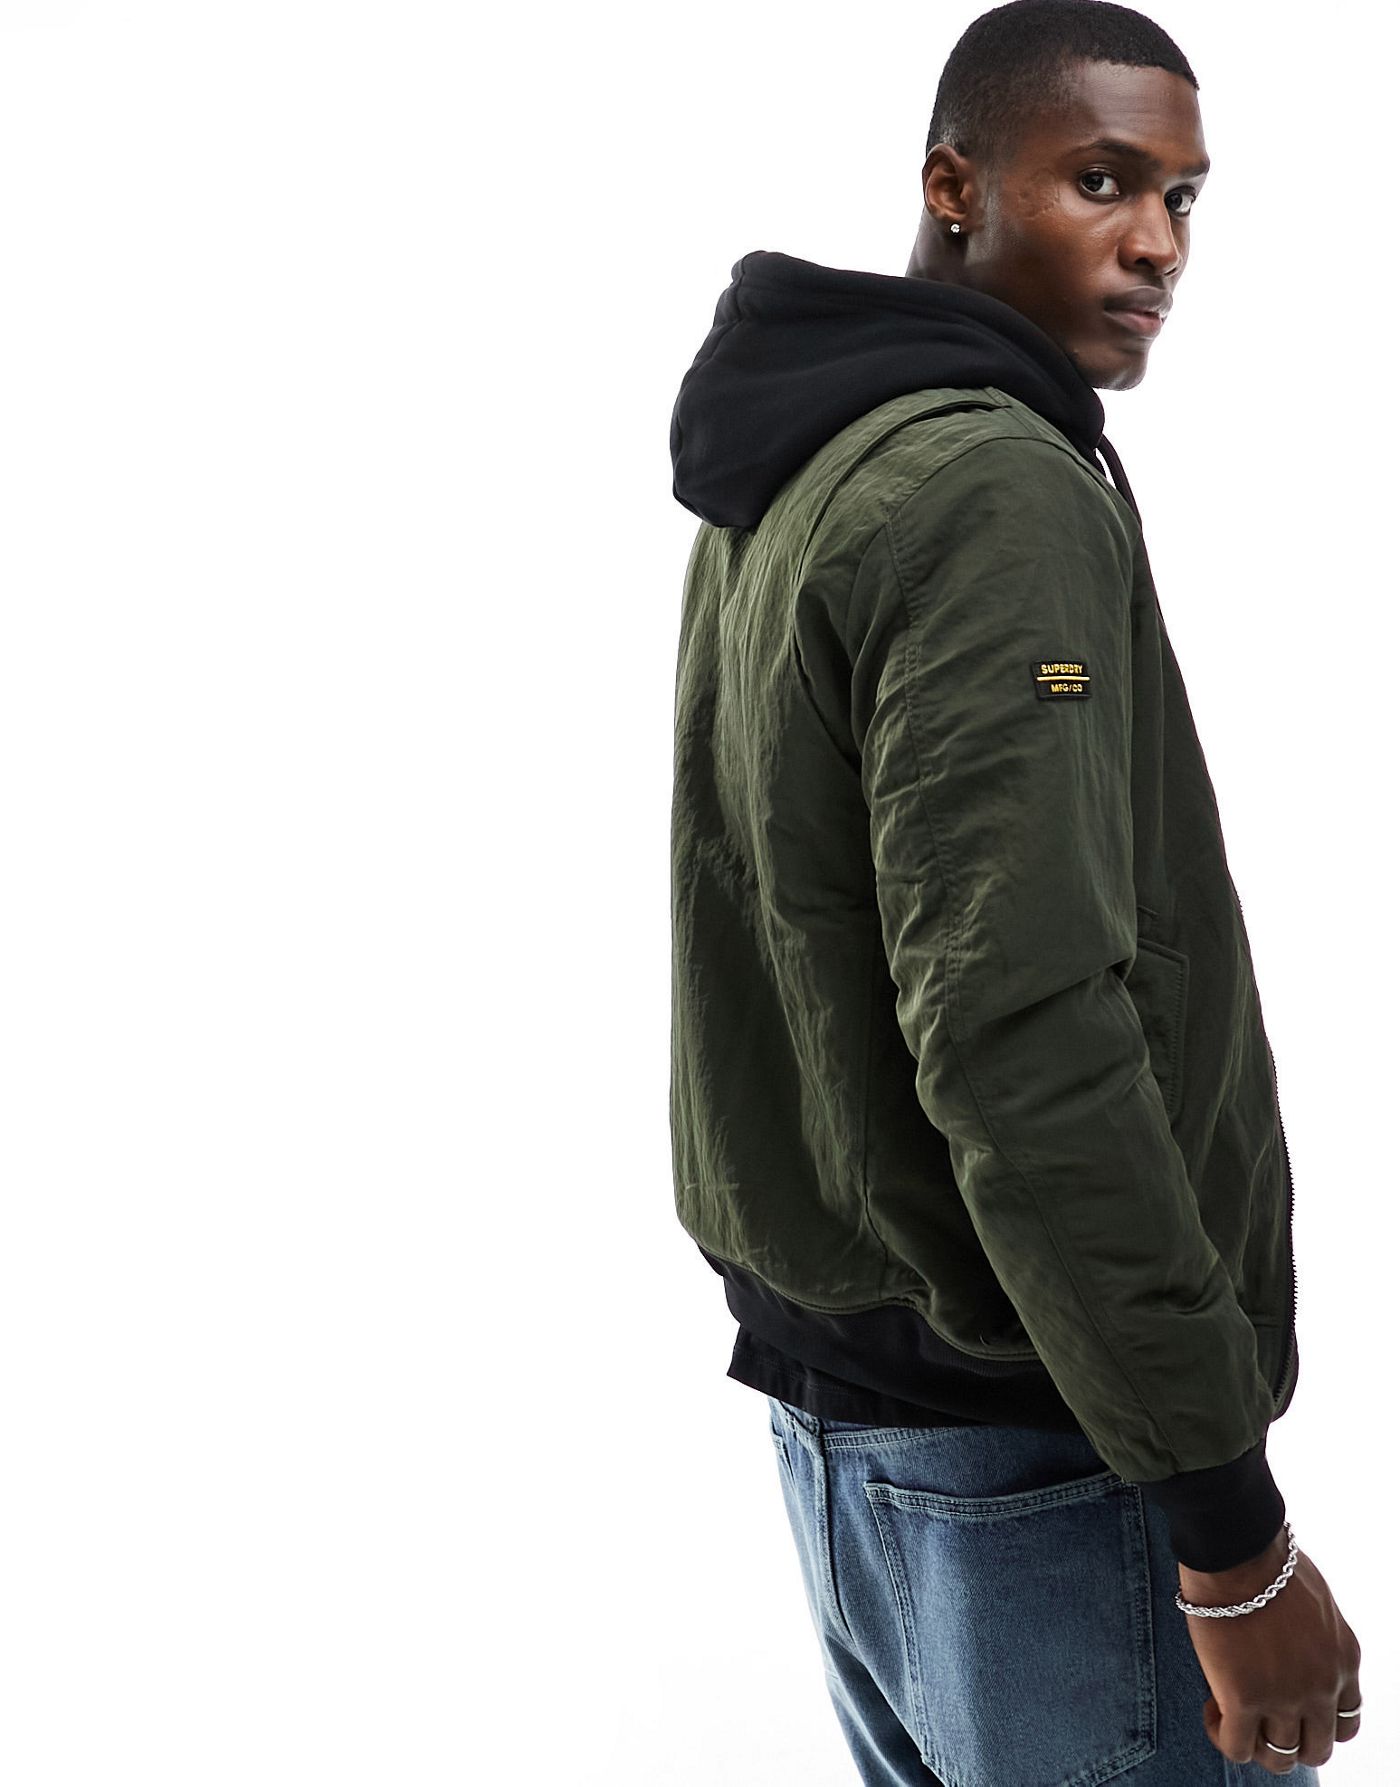 Superdry Military hooded ma1 bomber jacket in surplus goods olive